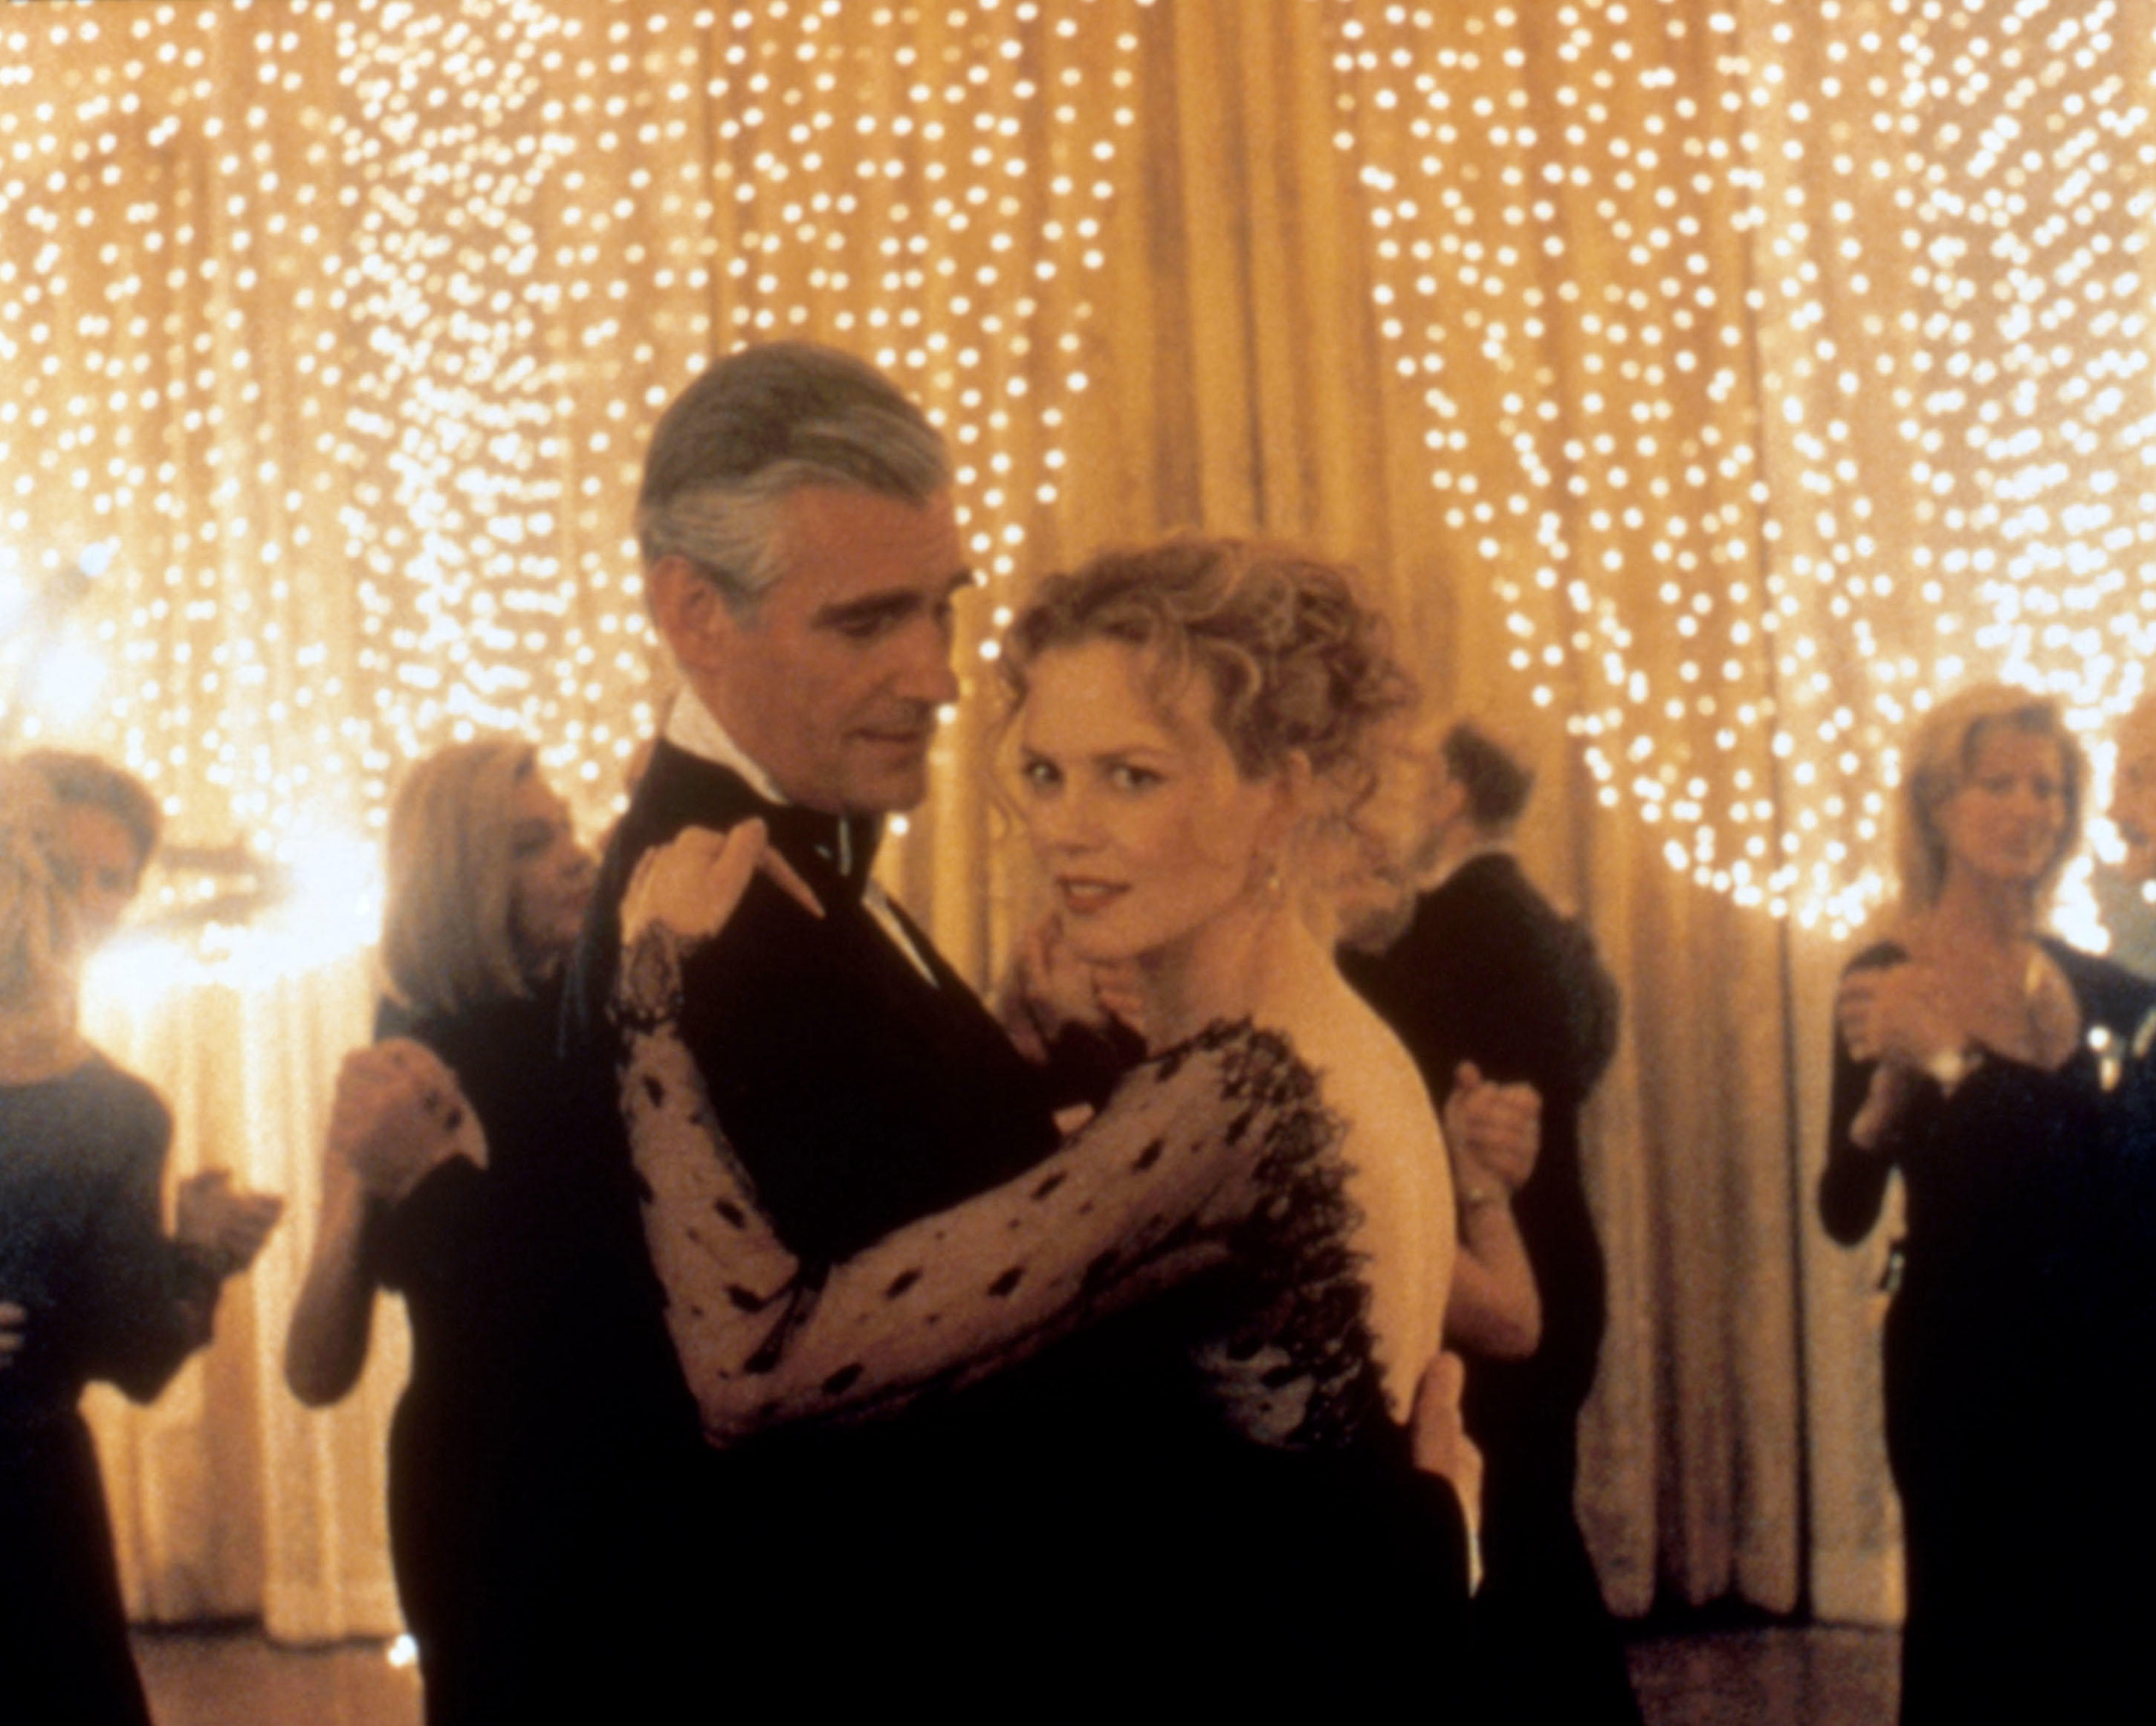 nicole kidman dancing with a man at a fancy party